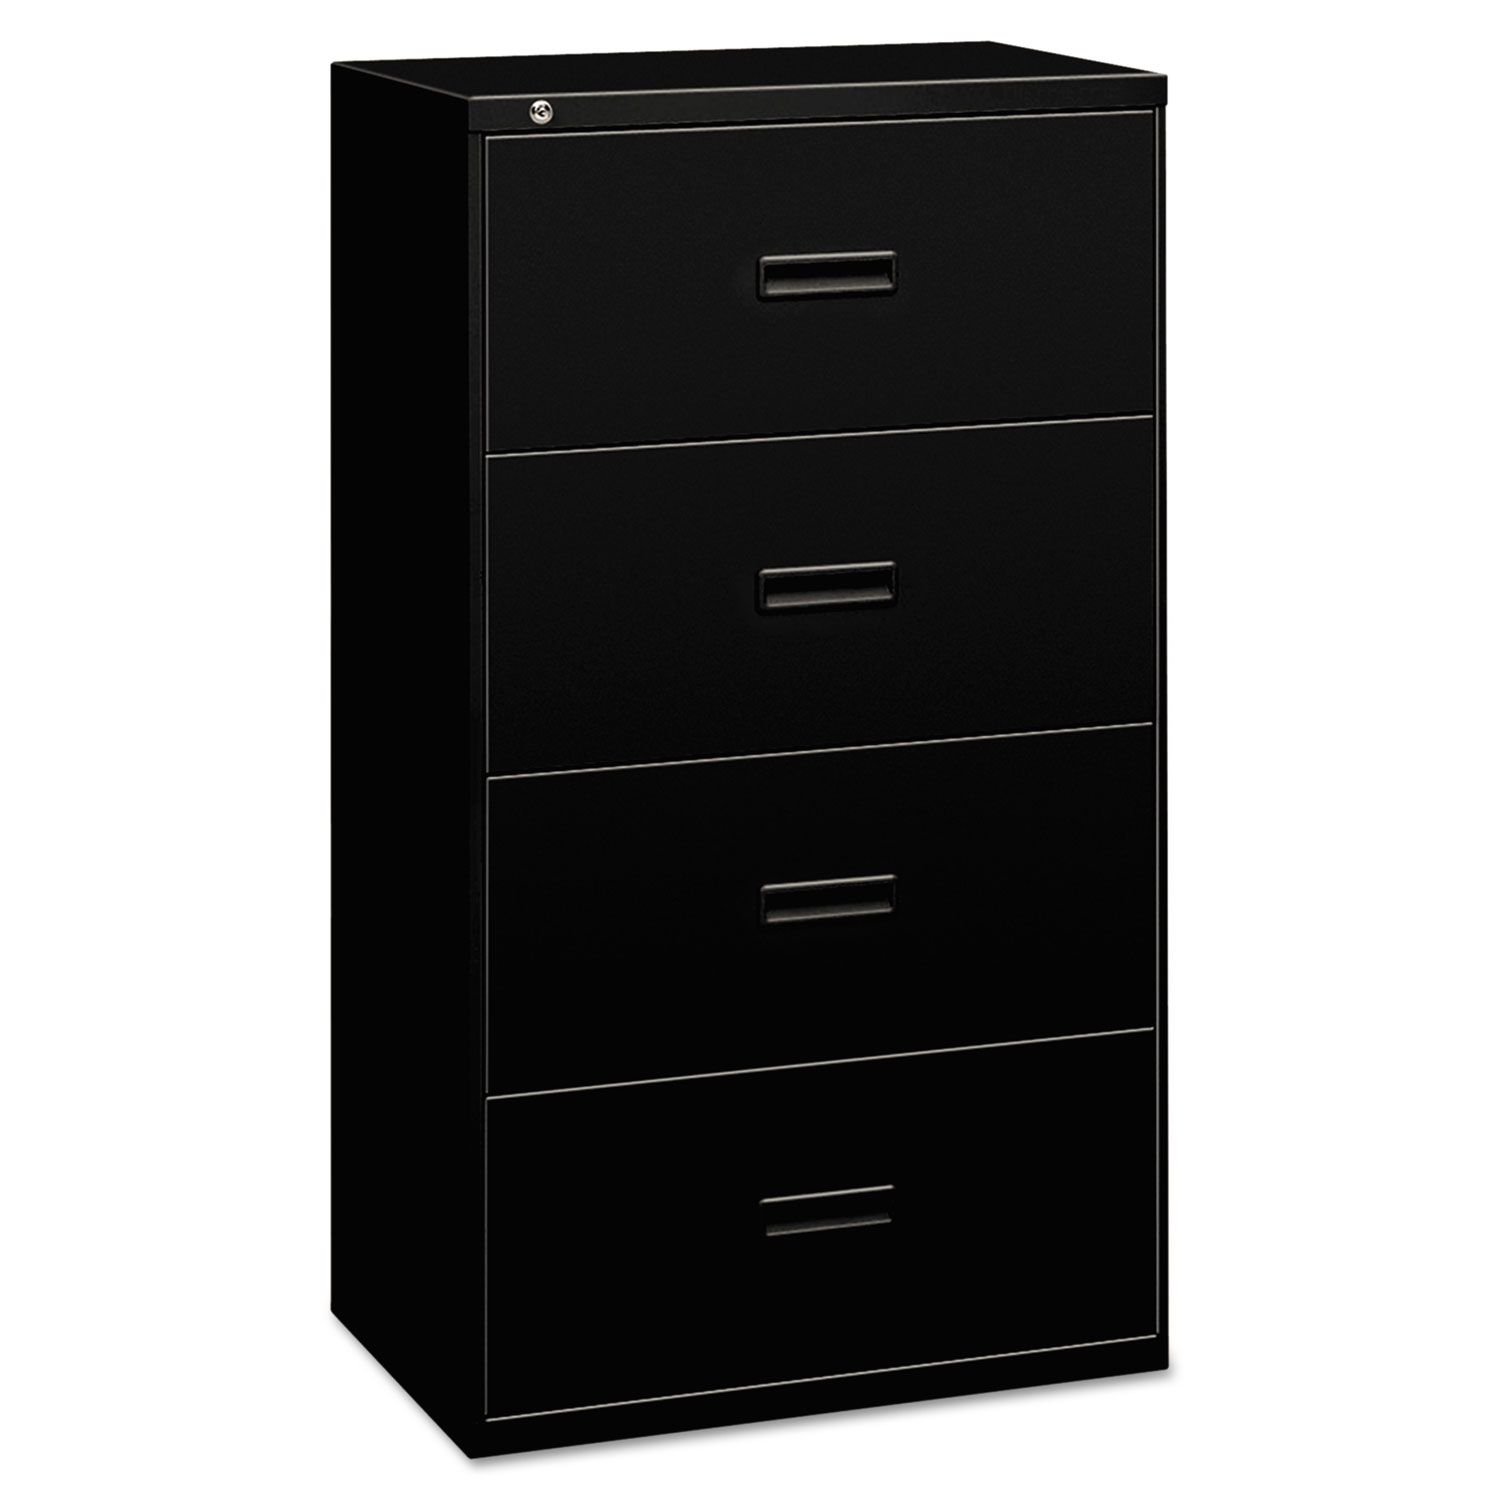 400 Series Four-Drawer Lateral File, 30w x 19-1/4d x 53-1/4h, Black